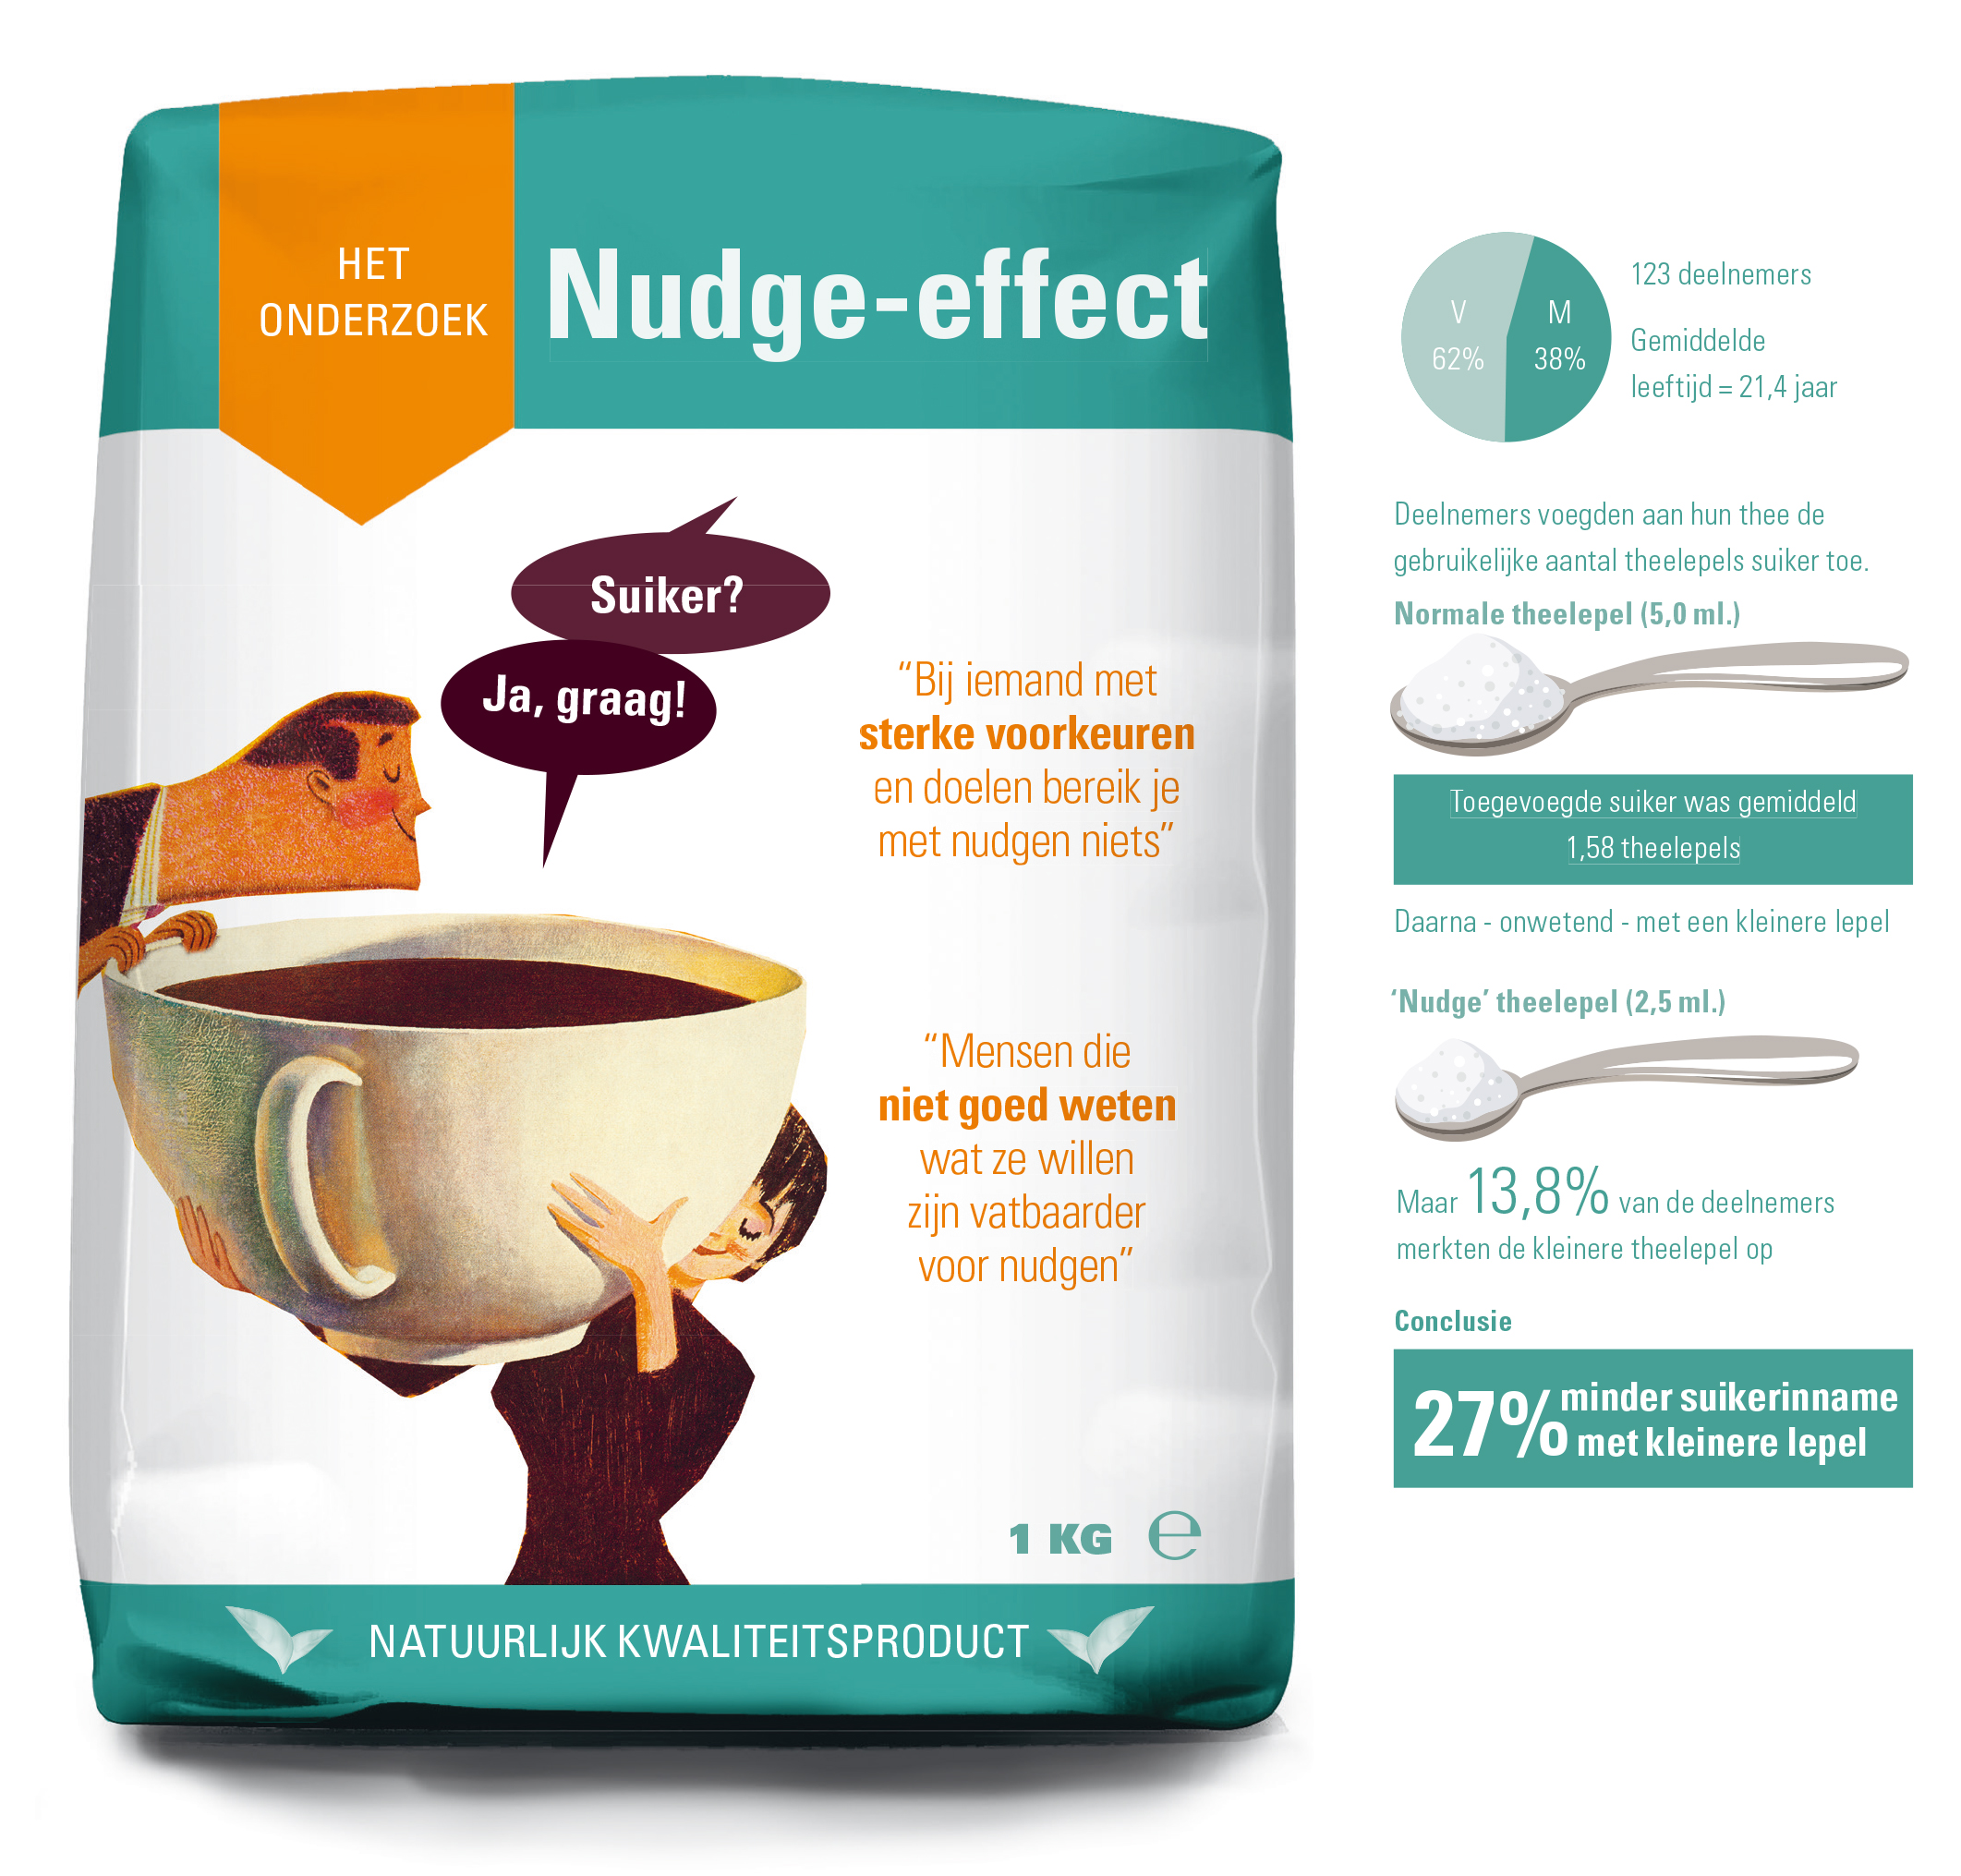 Nudge-effect infographic_credit Richard Wouters.jpg